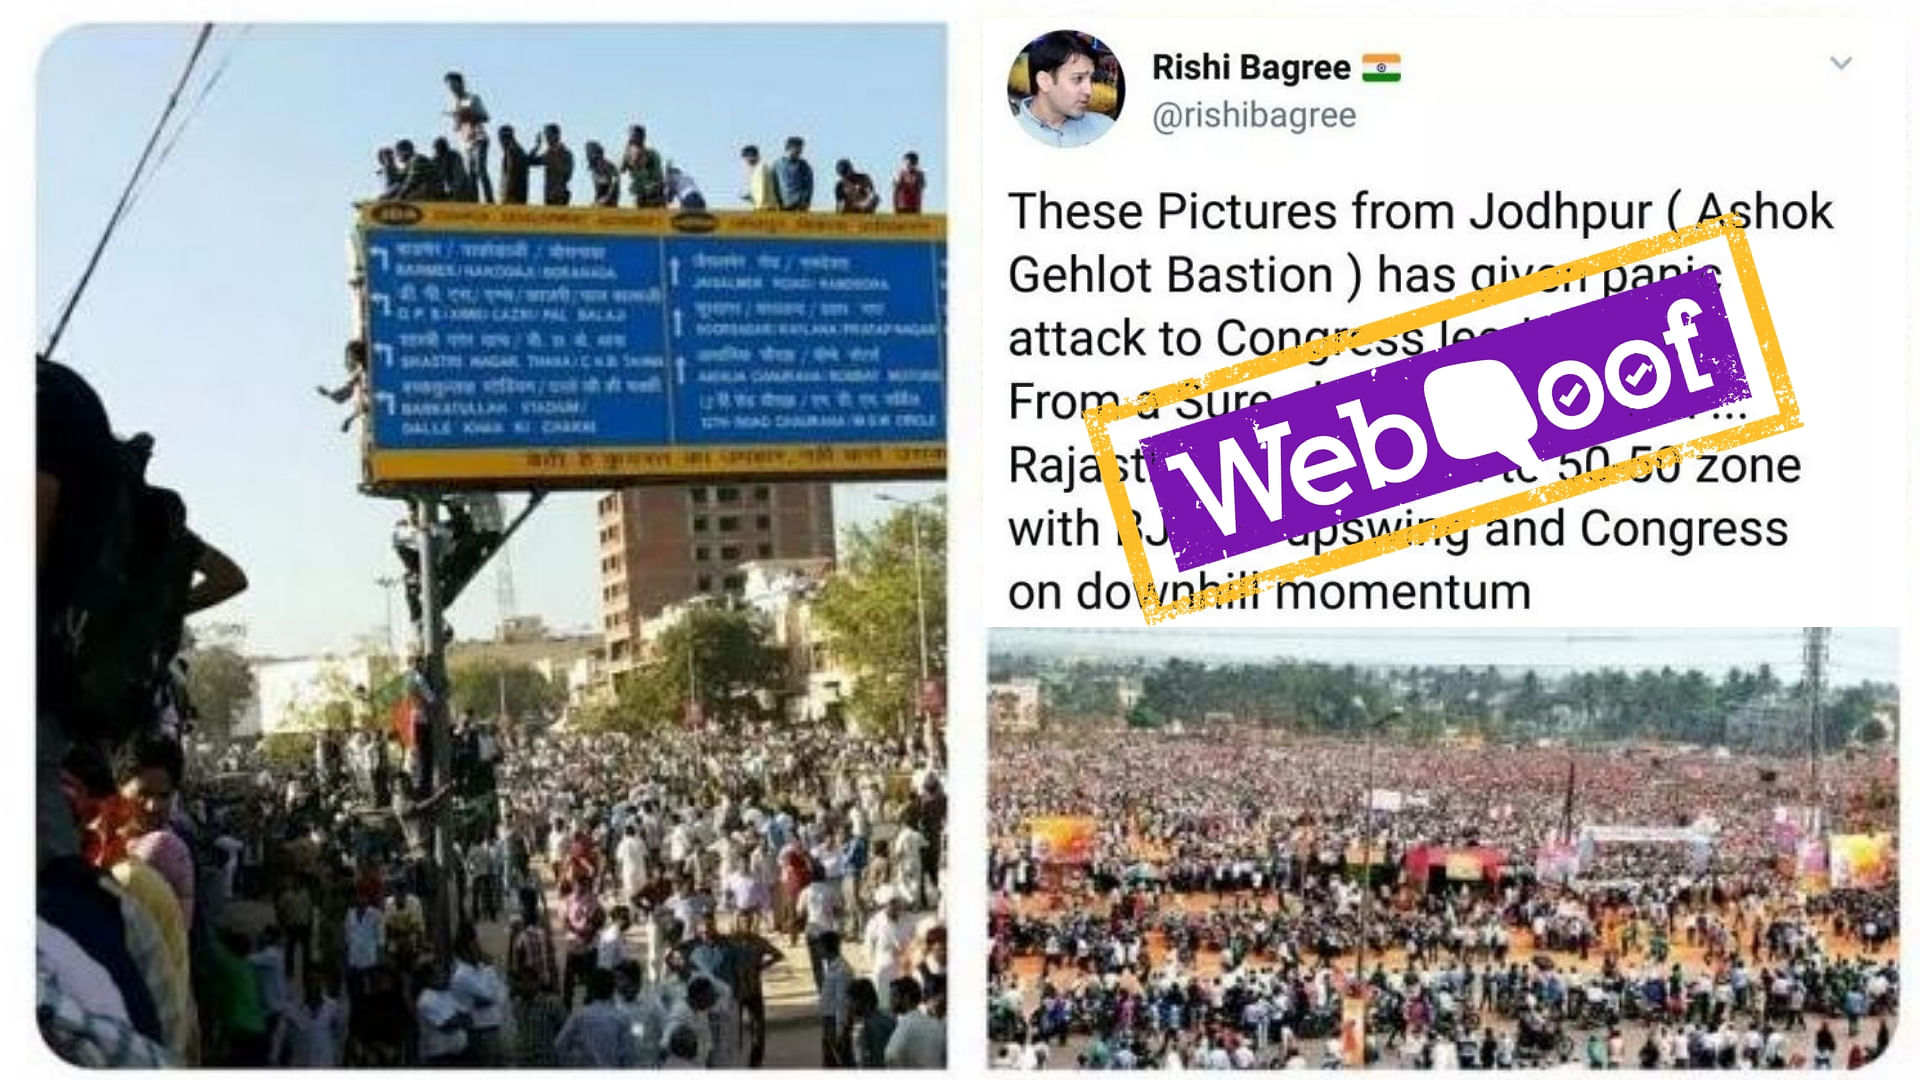 The photos are actually from 2013, and not 2018 rally in Jodhpur.